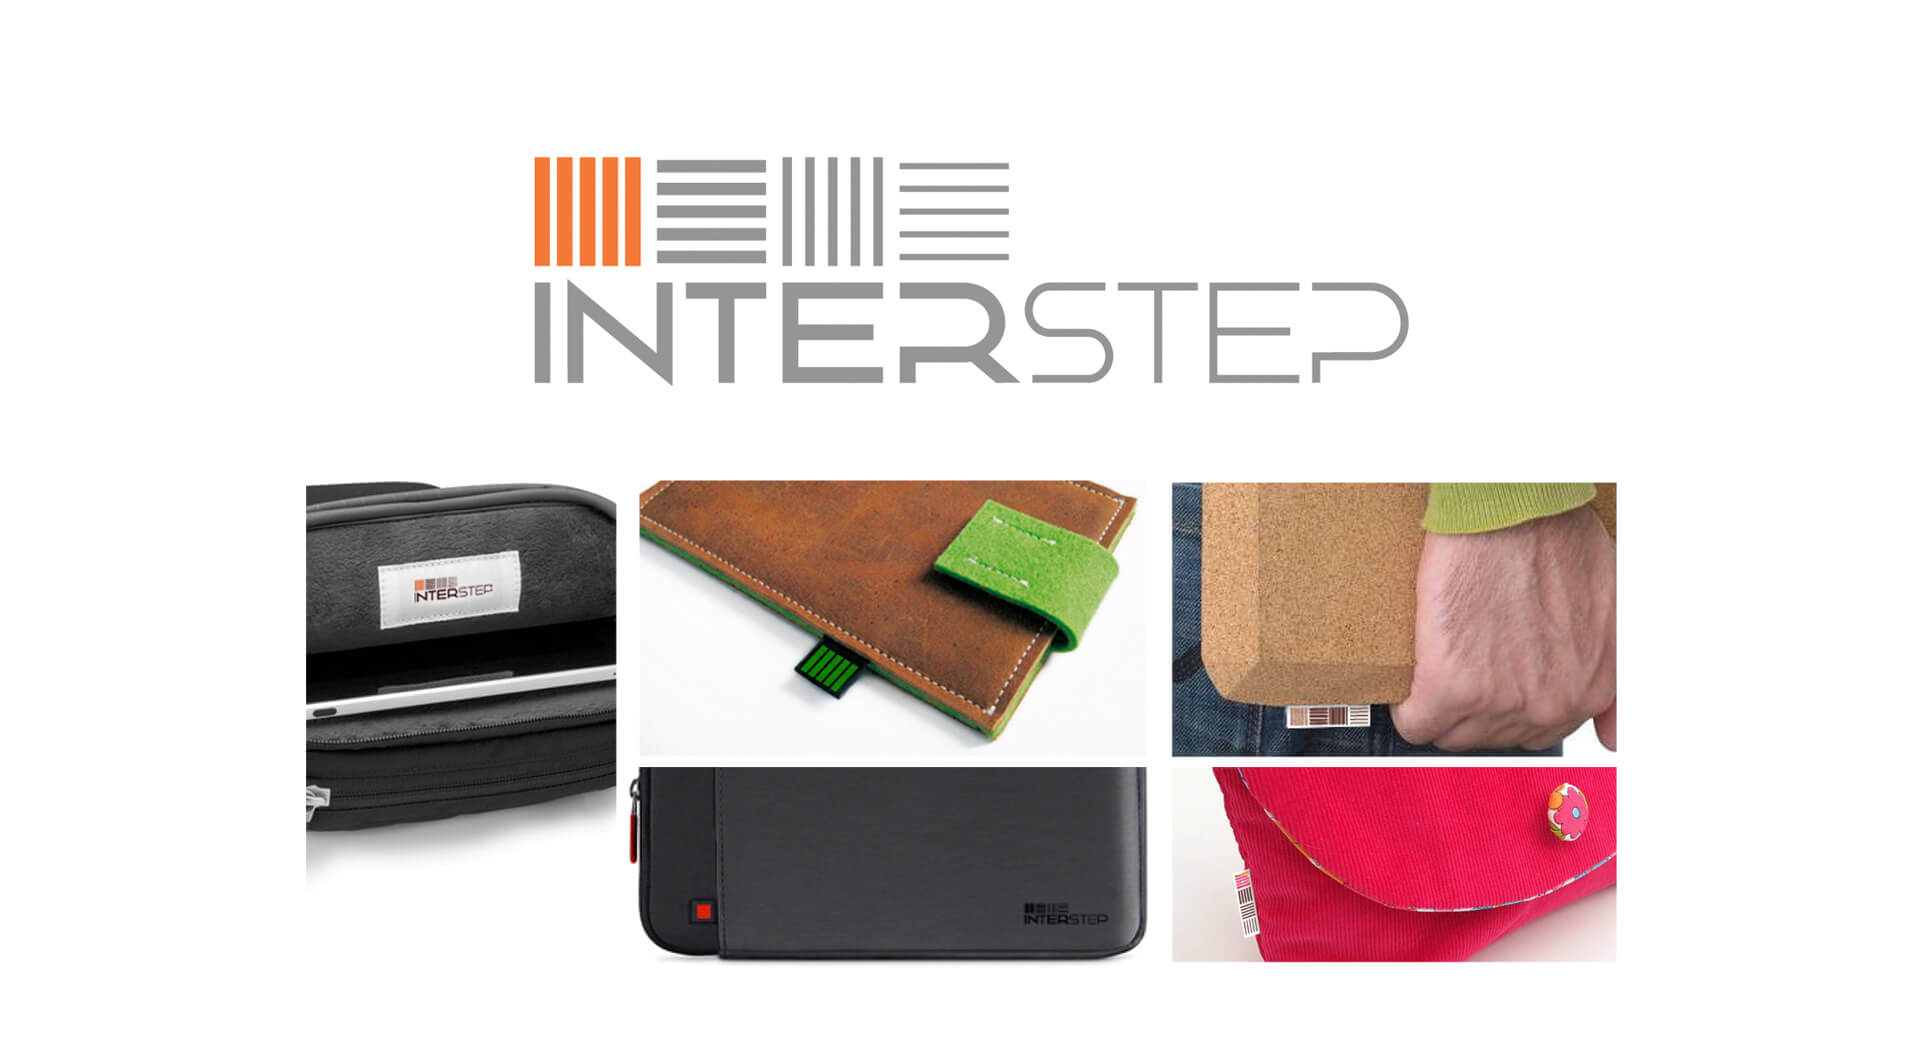  Interstep Russia technology, electronic accessories corporate identity